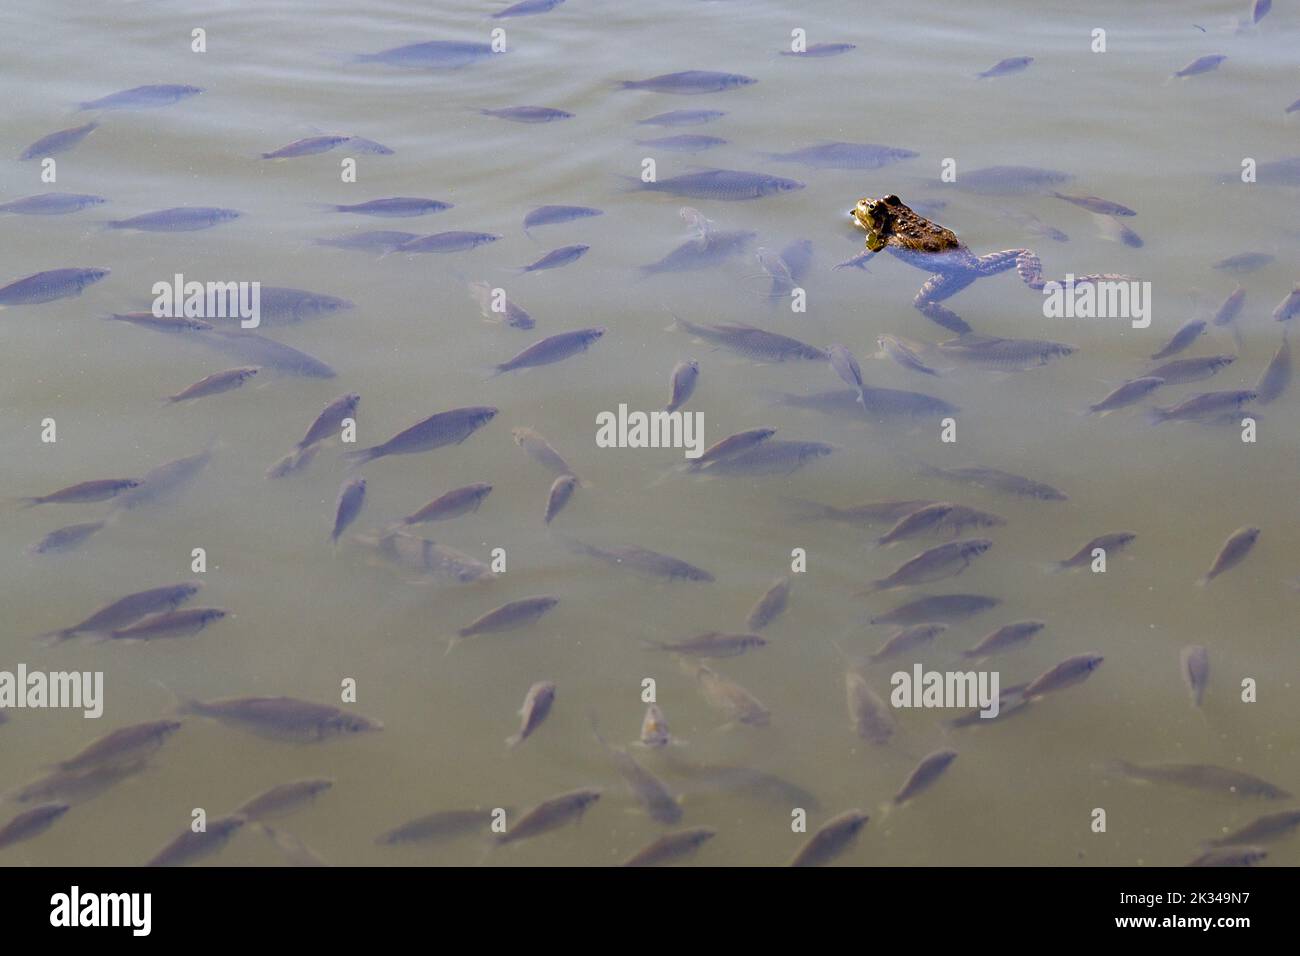 A frog swims among a large number of fish fry in a village lake. Stock Photo